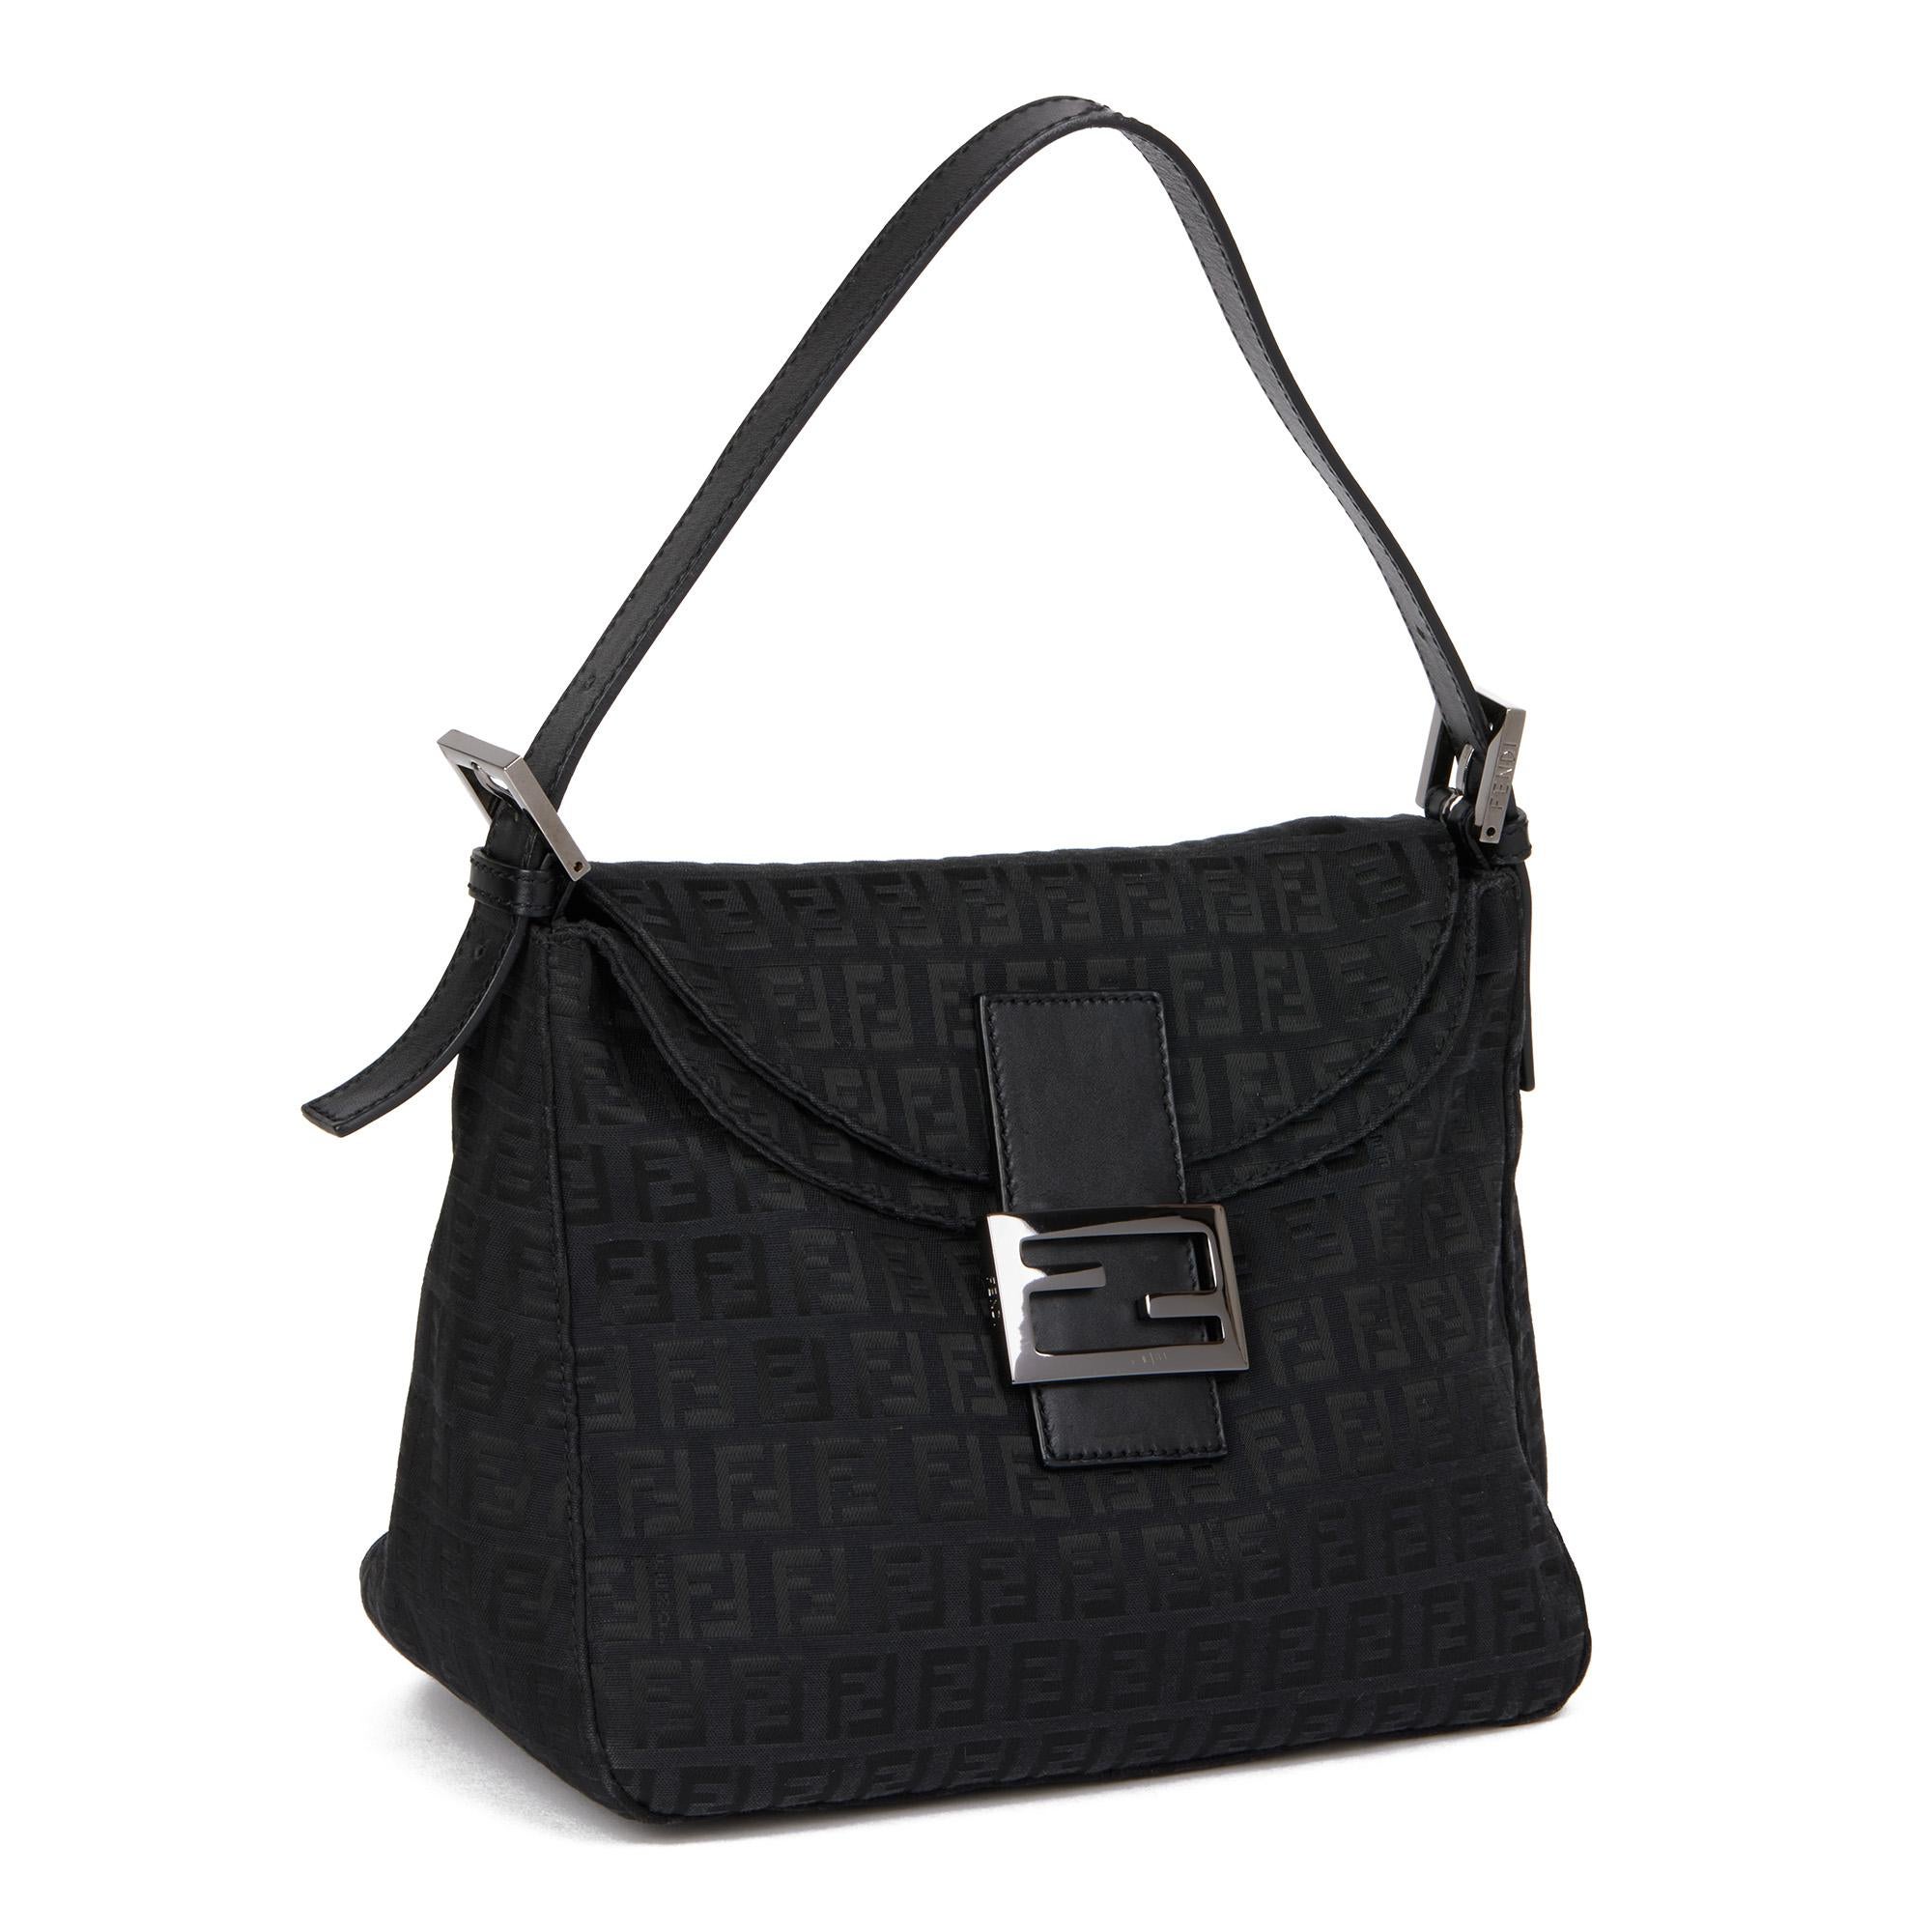 Fendi BLACK ZUCCA CANVAS & CALFSKIN LEATHER VINTAGE MAMA BAGUETTE

CONDITION NOTES
The exterior is in excellent condition with light signs of use.
The interior is in excellent condition with light signs of use.
The hardware is in excellent condition